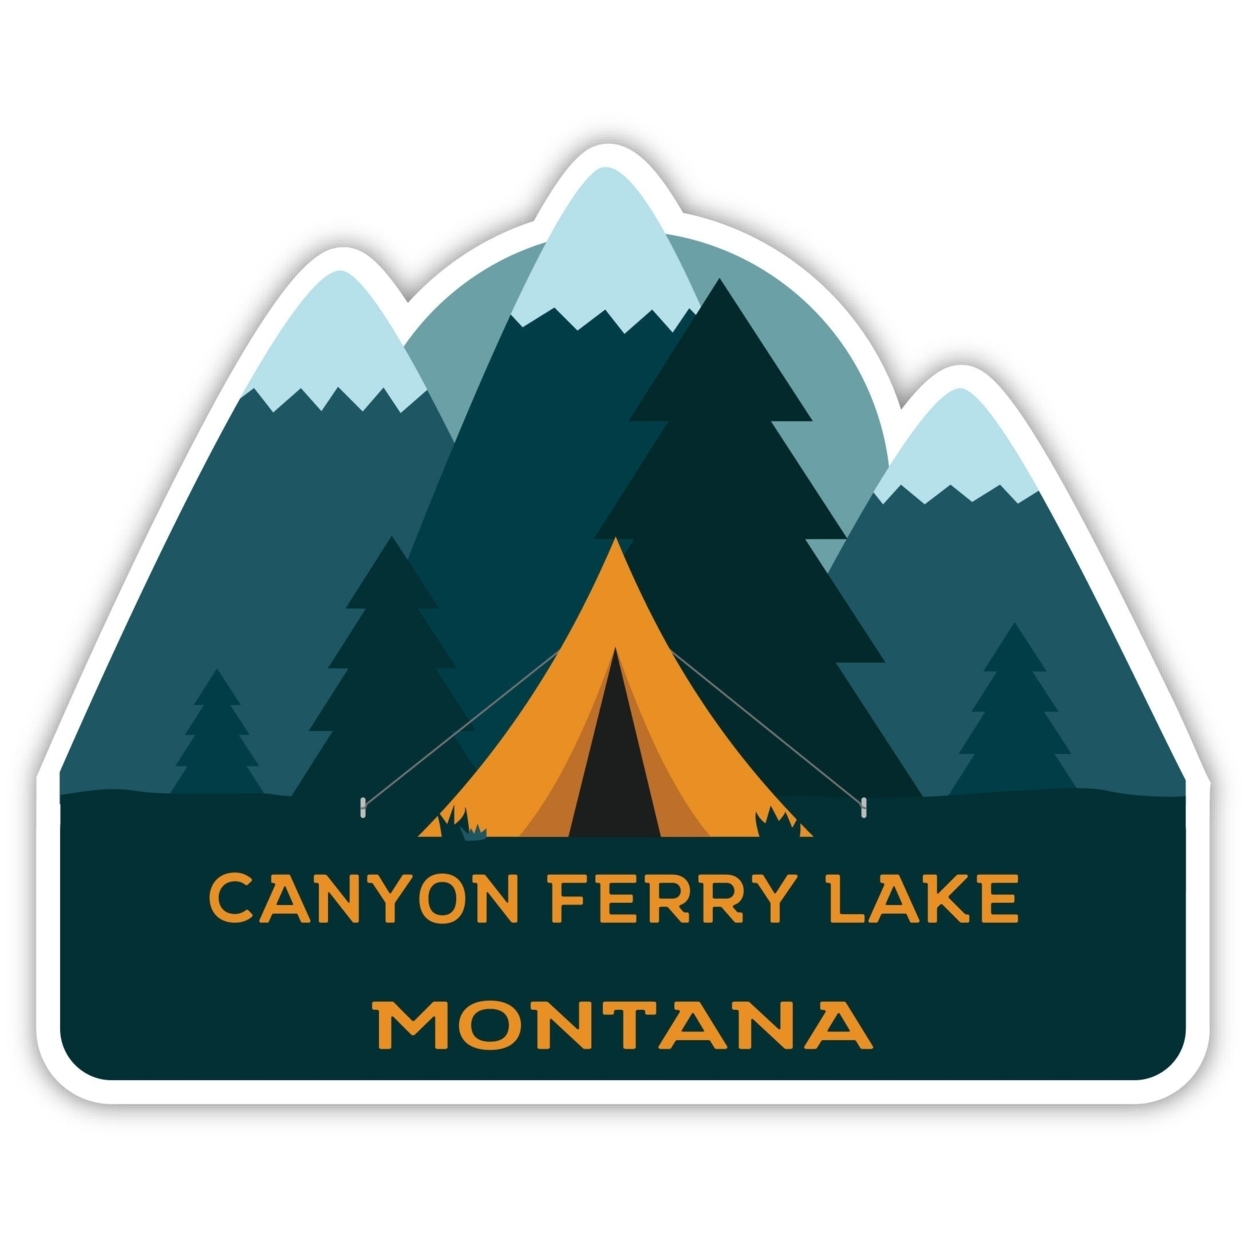 Canyon Ferry Lake Montana Souvenir Decorative Stickers (Choose Theme And Size) - 4-Pack, 12-Inch, Tent